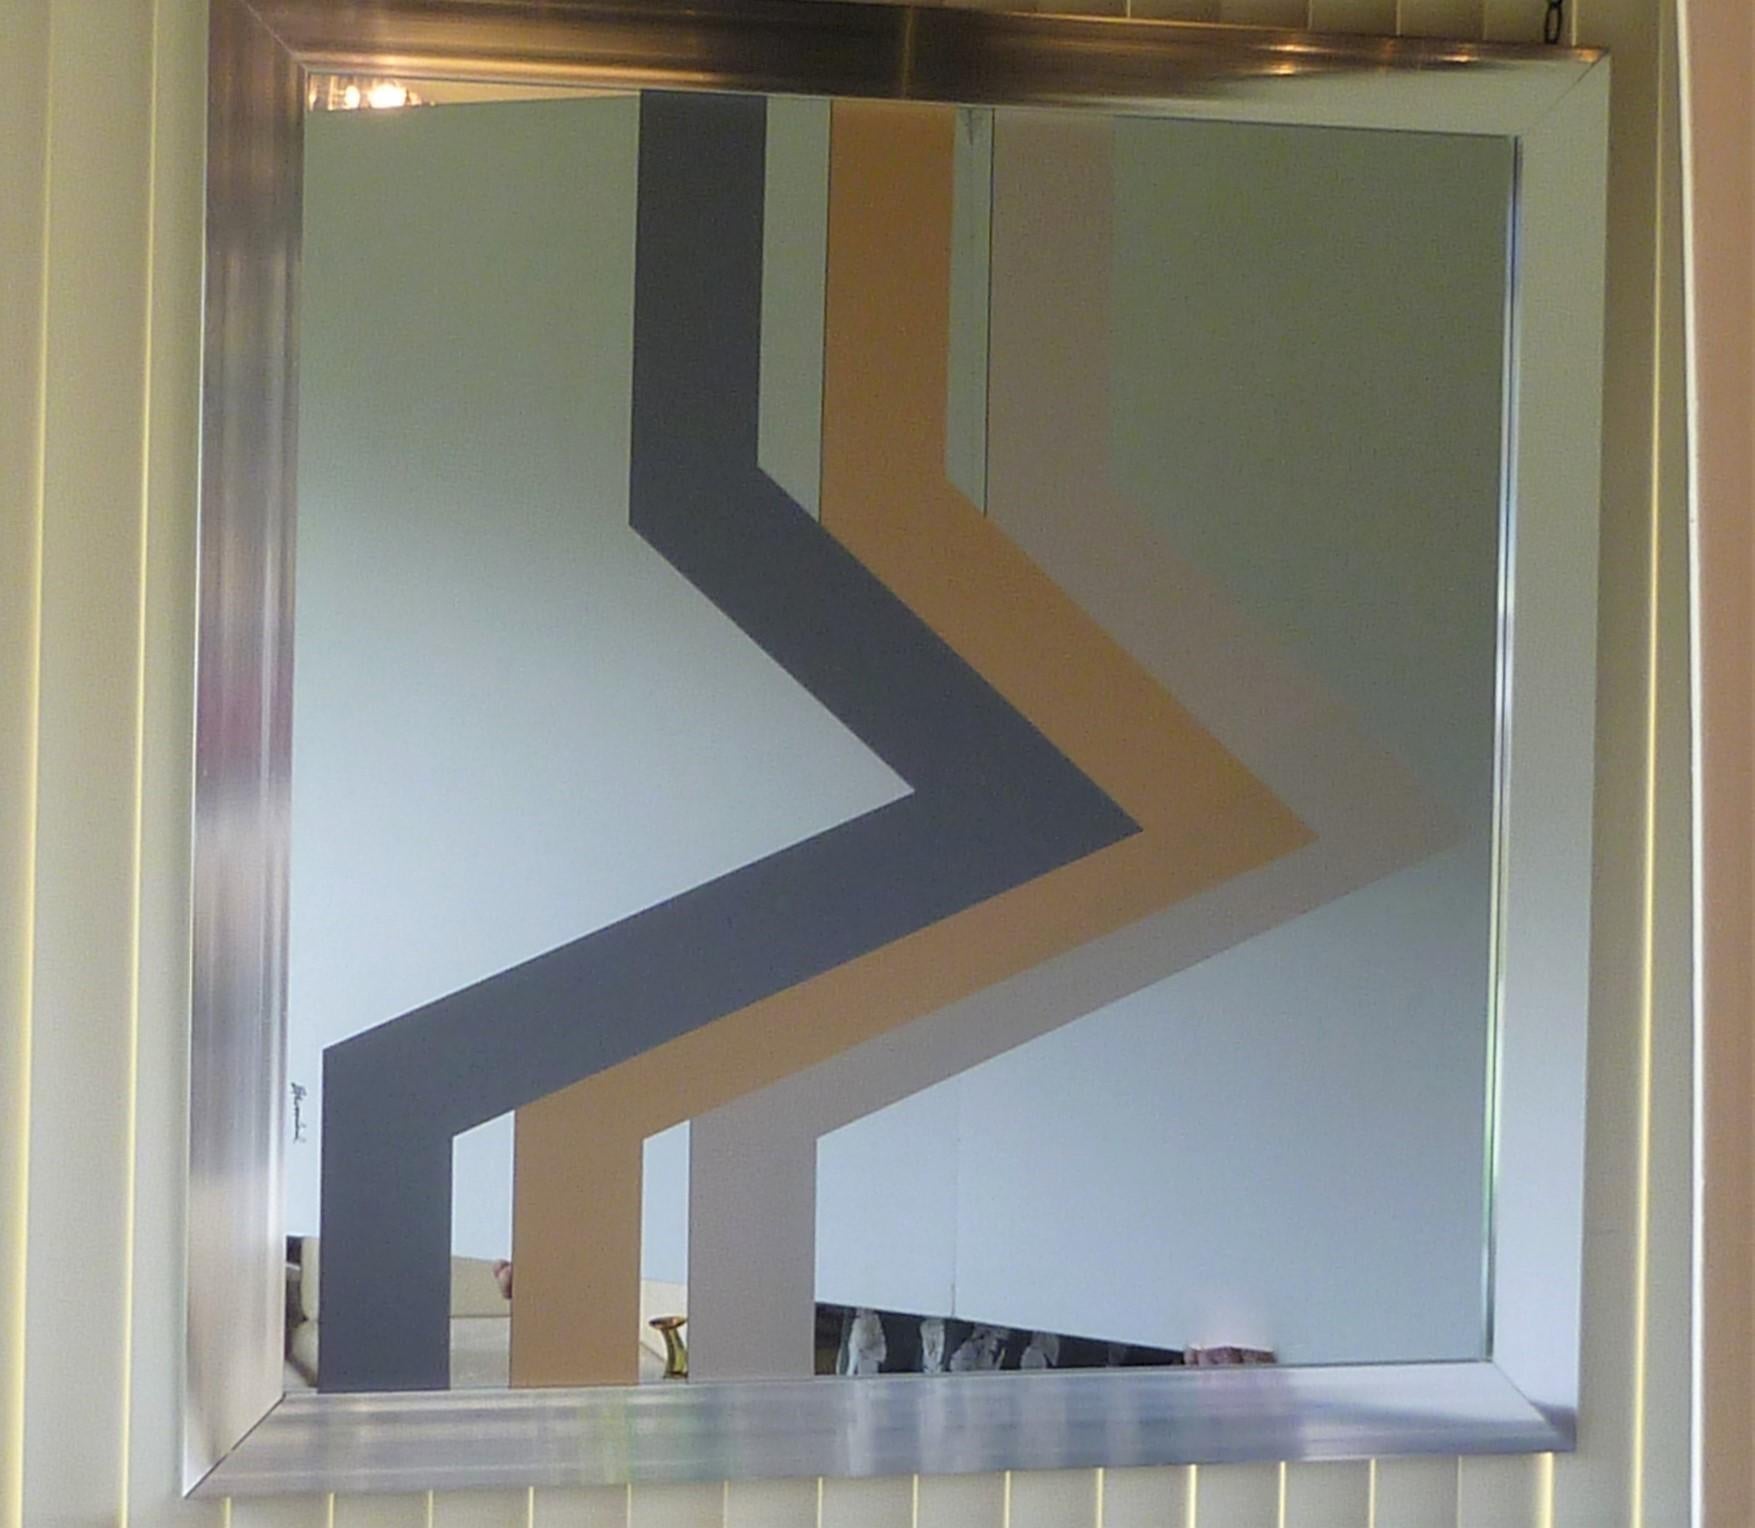 Large metal frame mirror with a pop op graphic geometric design from 1975 and from the firm Expressions. Modern and ageless, working well today as when created. Signed in the design. Mostly mirror with design in three color graphic in gray,